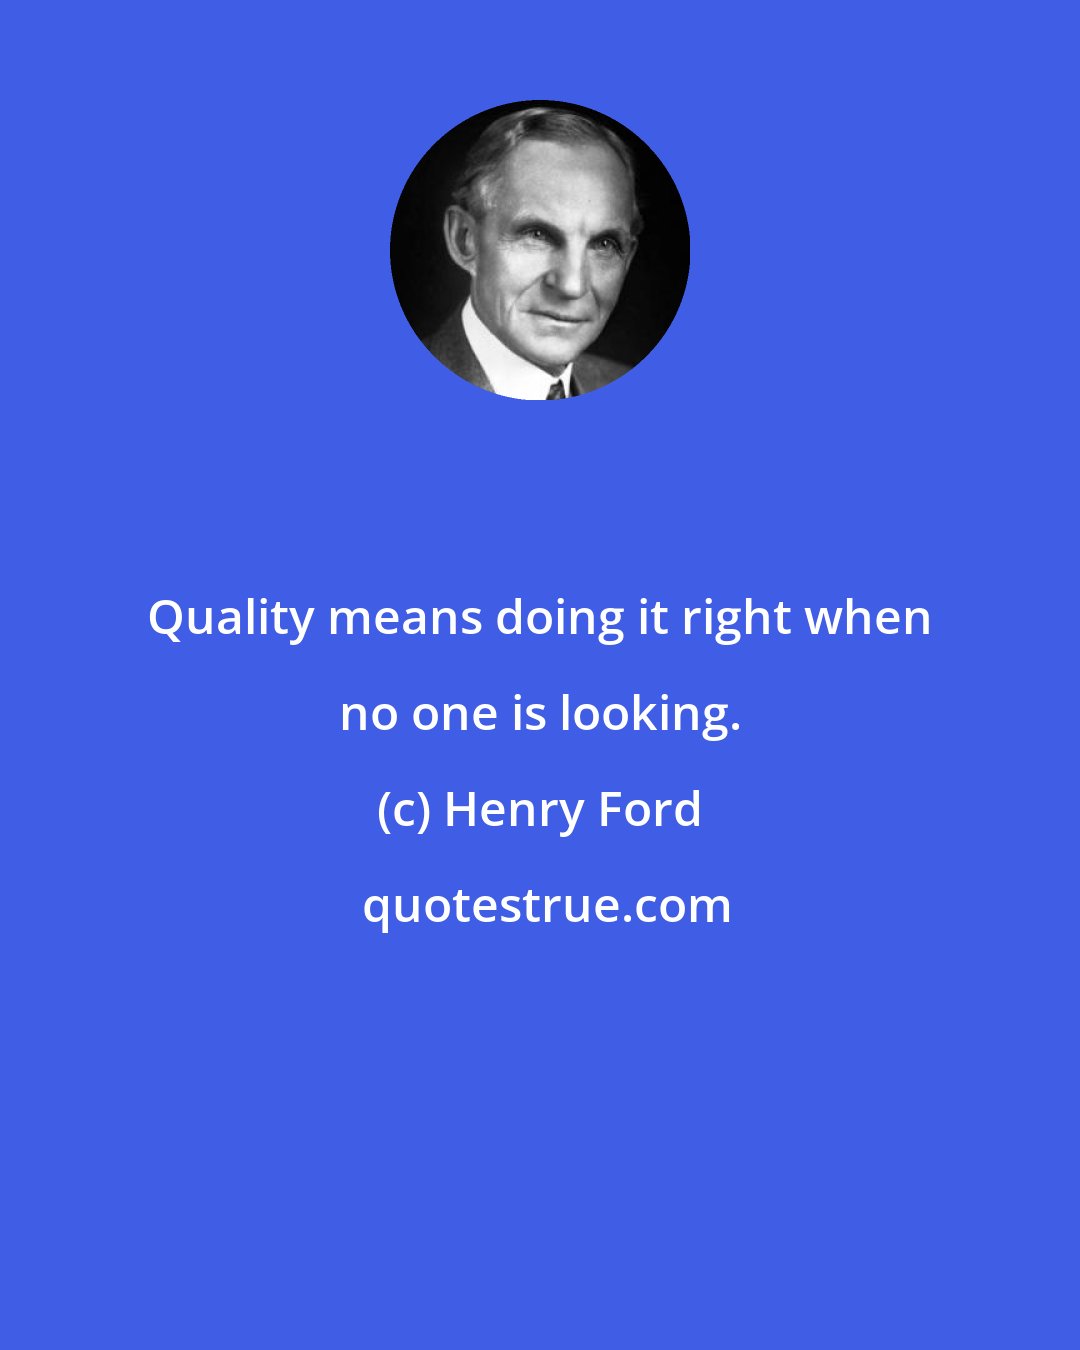 Henry Ford: Quality means doing it right when no one is looking.